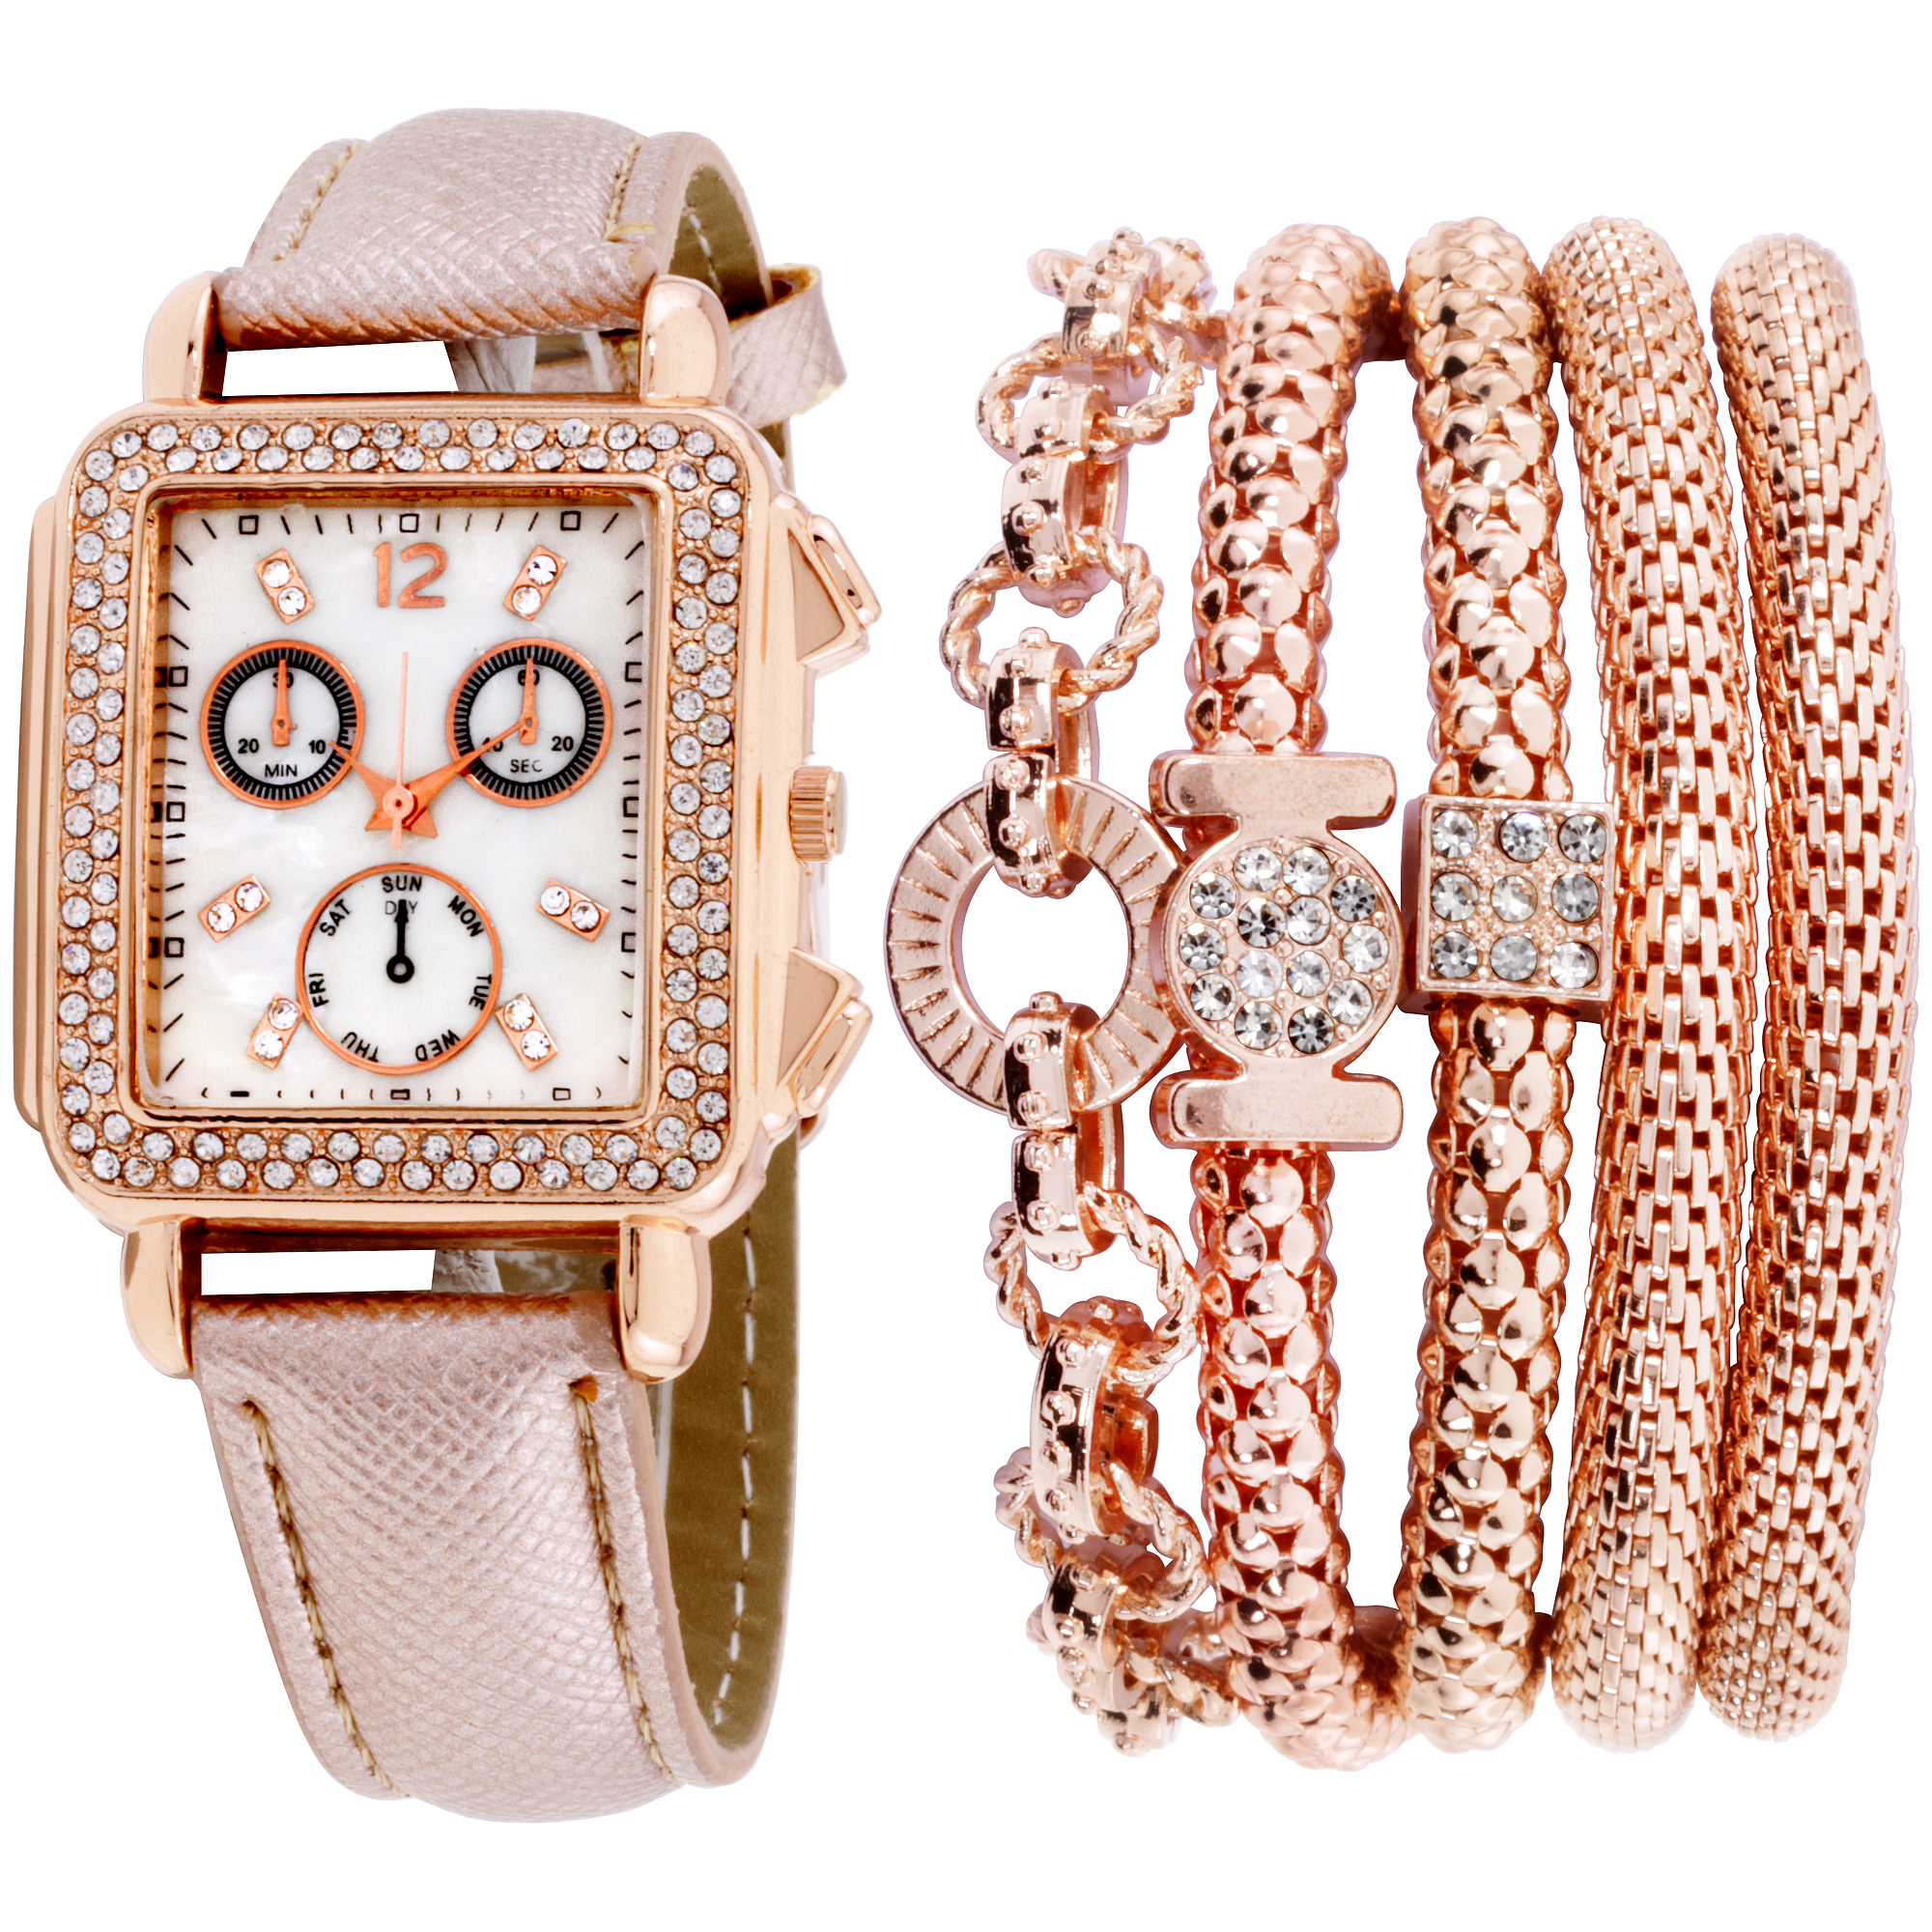 Jaclyn Smith Ladies Rose Gold Watch and Bracelet Set